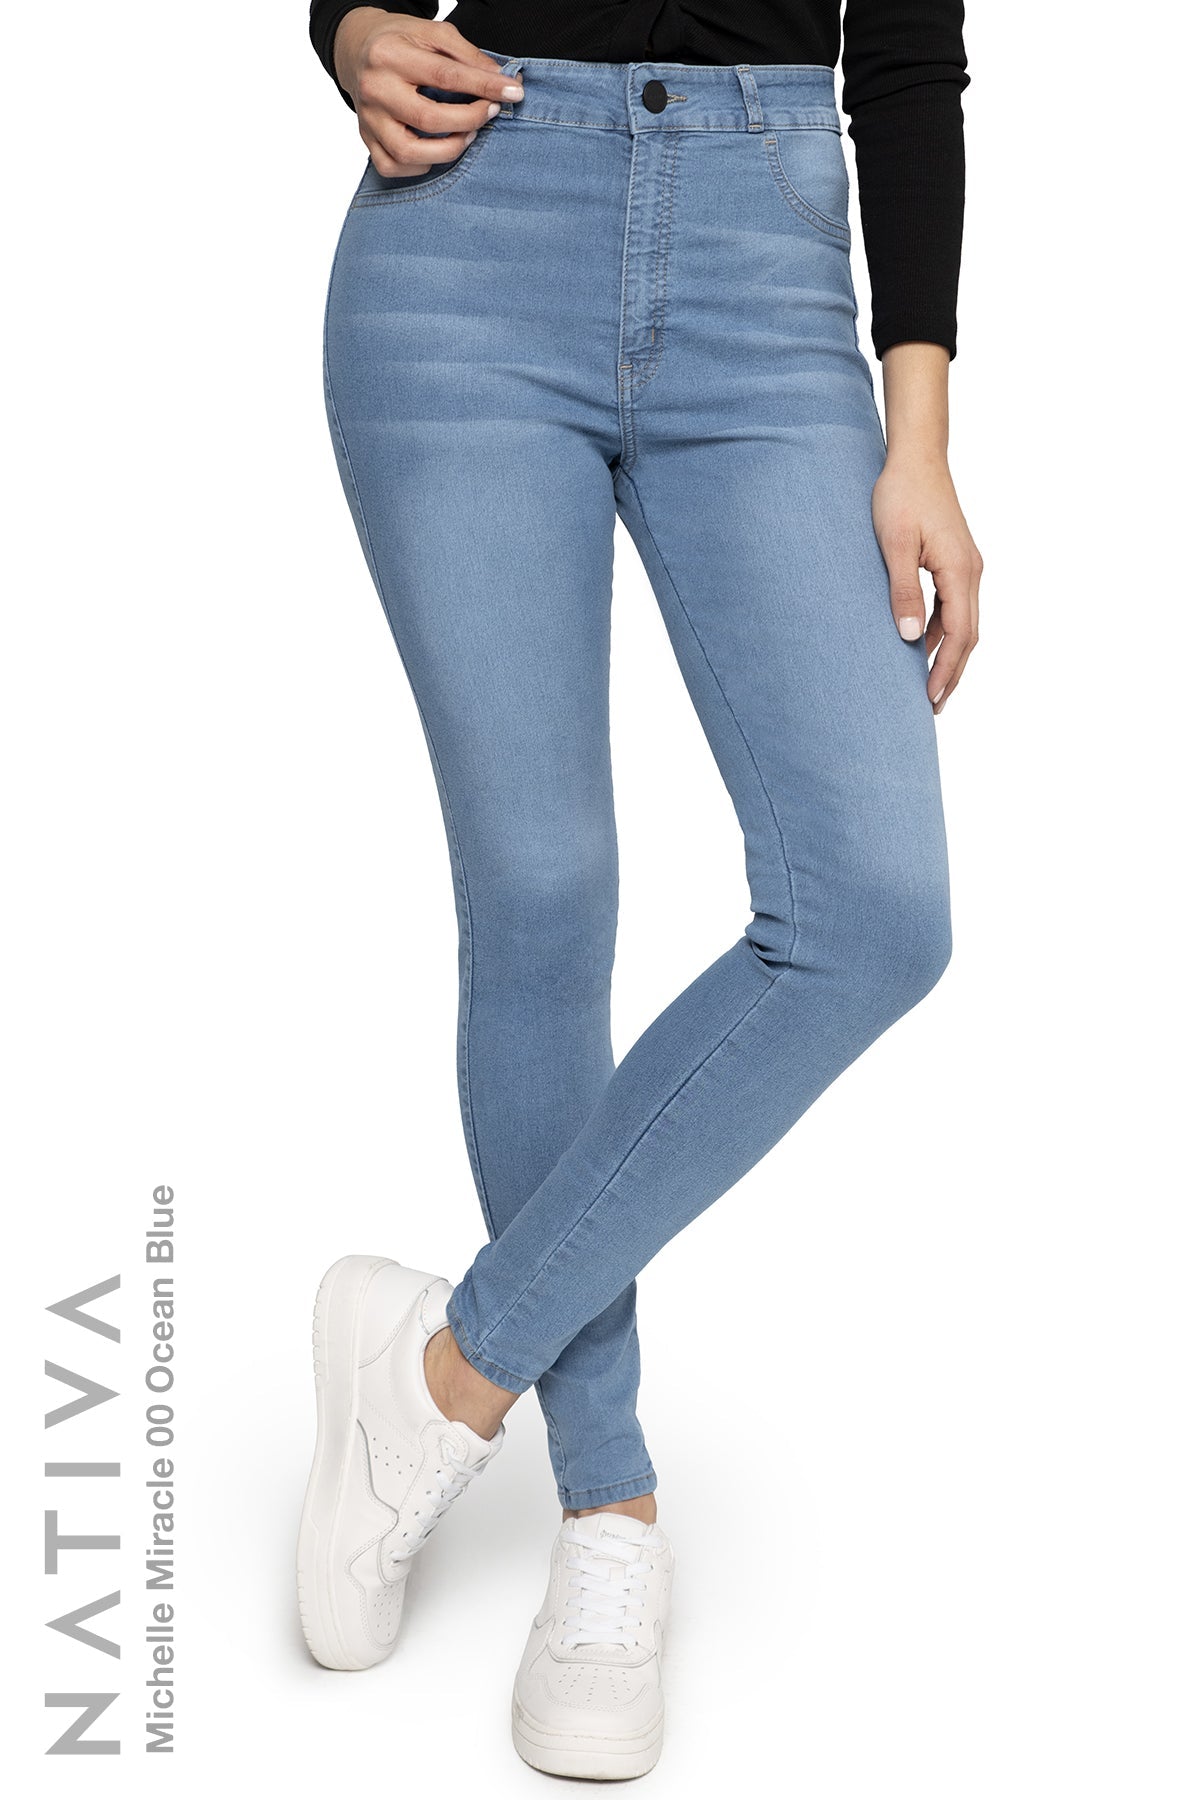 NATIVA, STRETCH JEANS. MICHELLE Ca BLUE, MIRACLE OCEAN High 00 Shaping